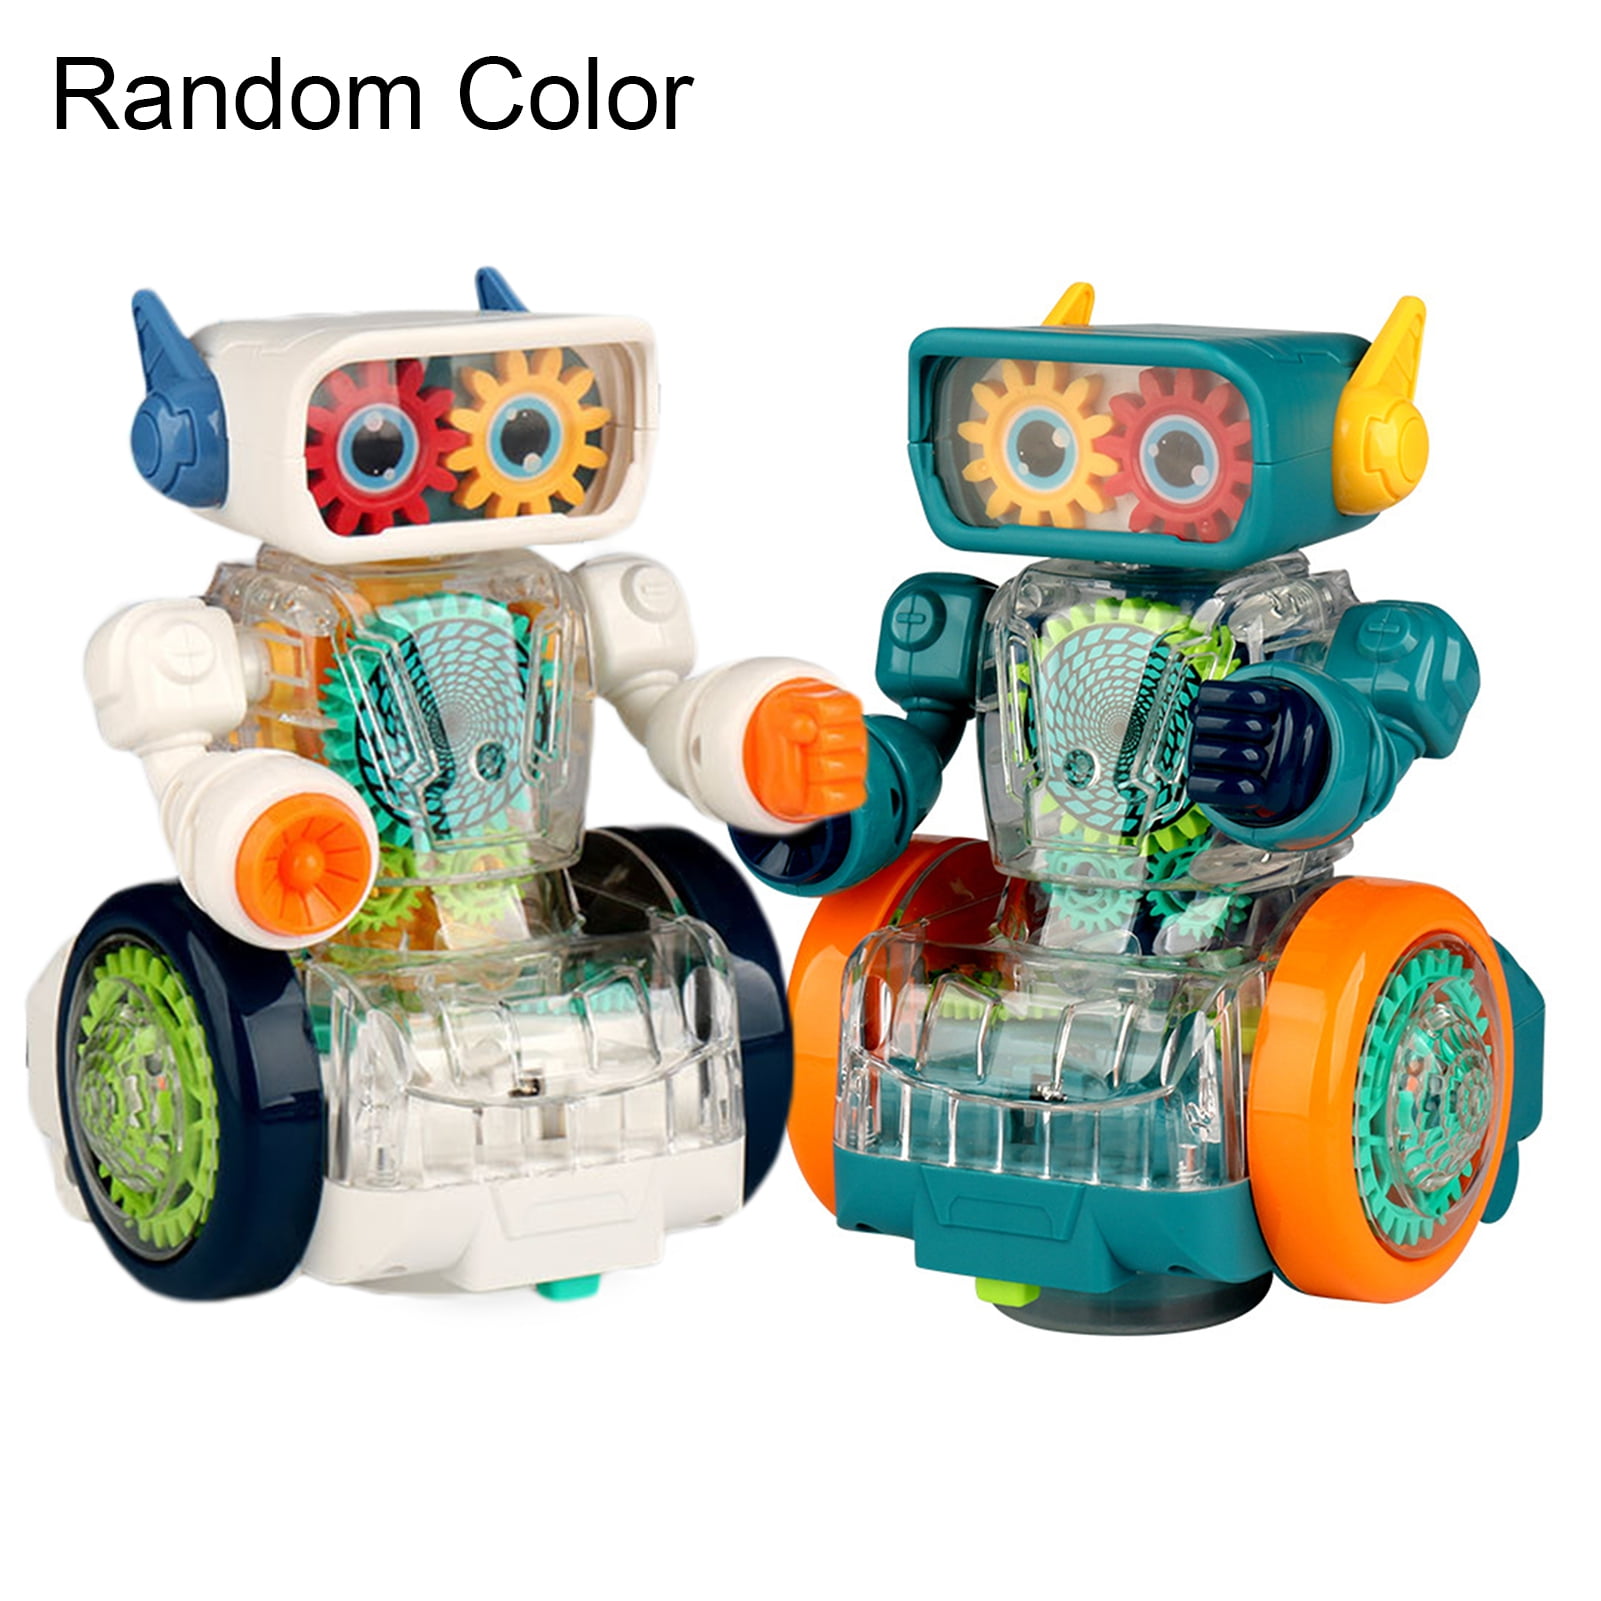 EEOCWF Electric Talking Robots Rechargeable Talking Robot Interactive Toy  for Kids Best Birthday Gifts - Wecolor